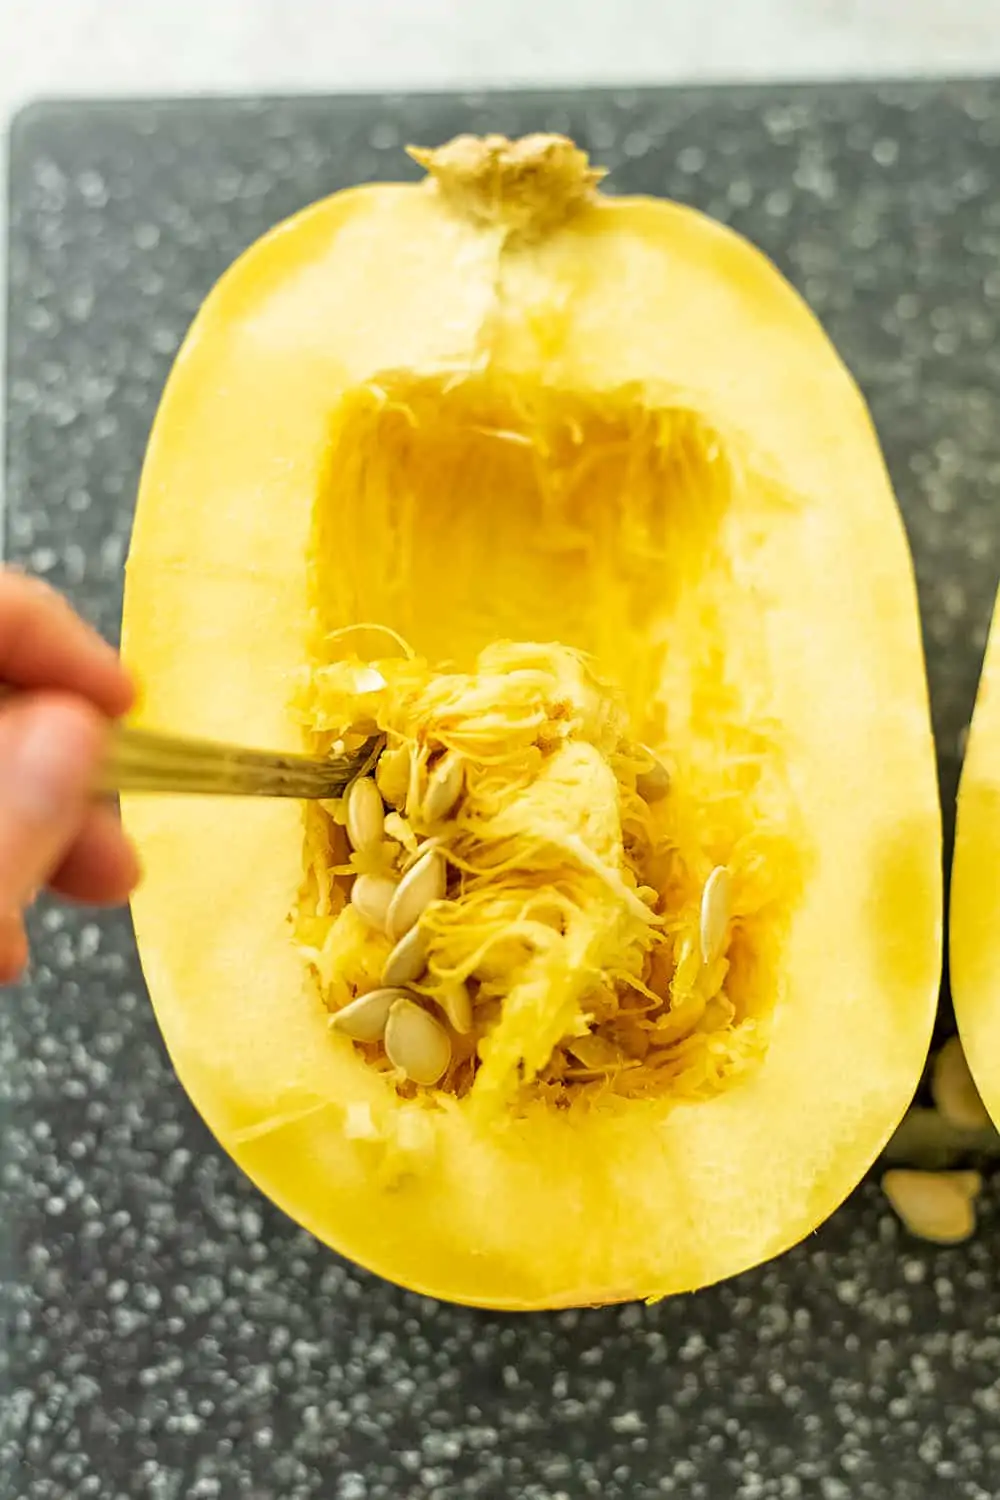 Spoon removing the seeds of a spaghetti squash.